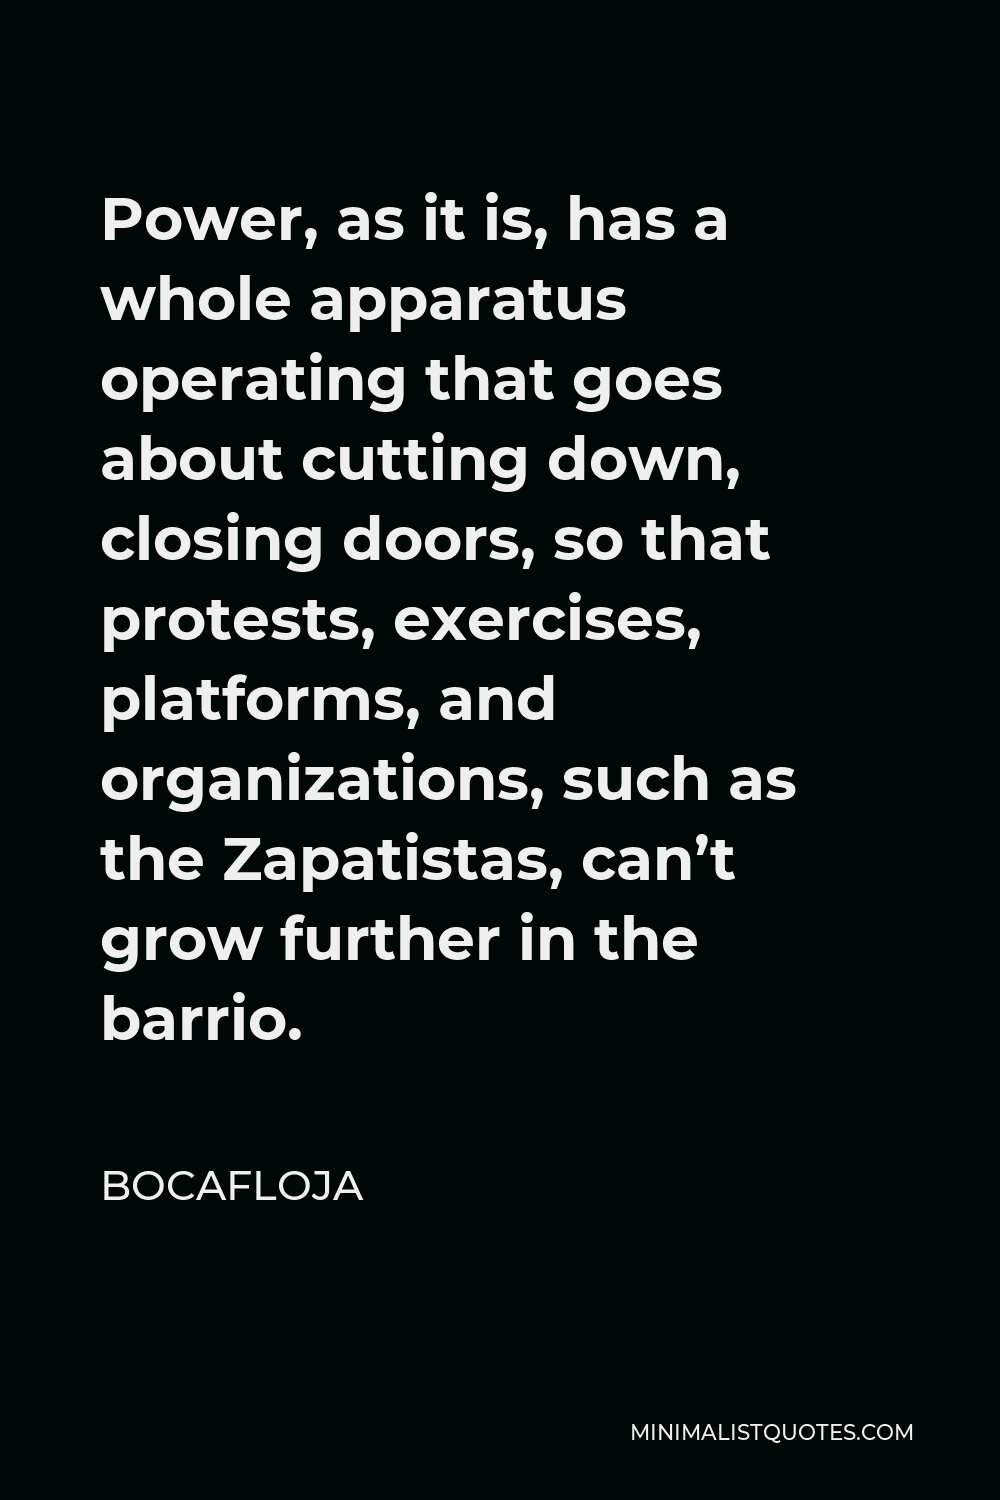 Bocafloja Quote - Power, as it is, has a whole apparatus operating that goes about cutting down, closing doors, so that protests, exercises, platforms, and organizations, such as the Zapatistas, can’t grow further in the barrio.